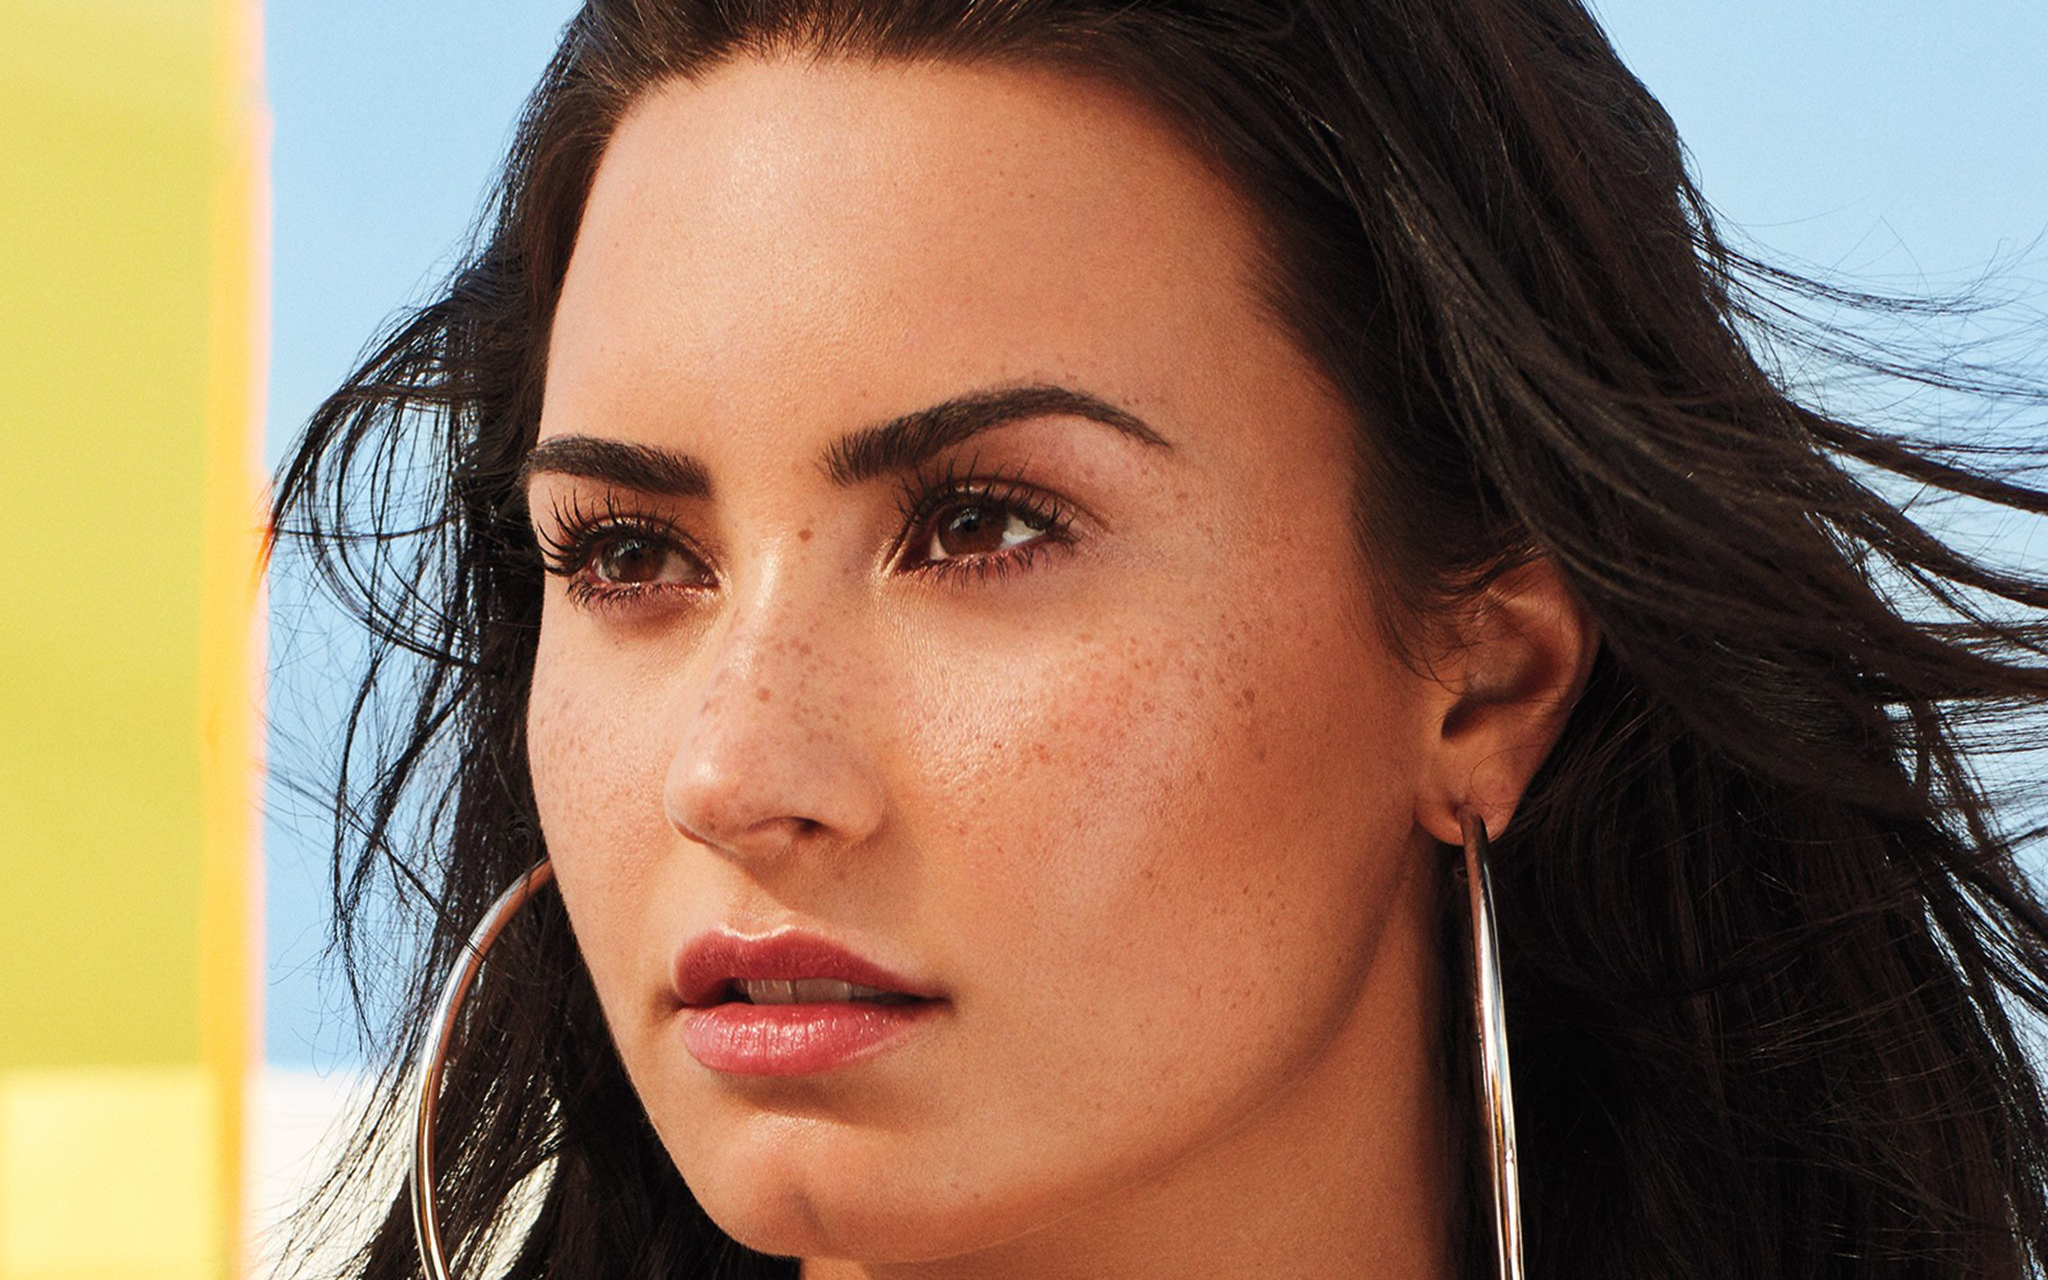 Demi Lovato for Instyle 2018 Wallpapers